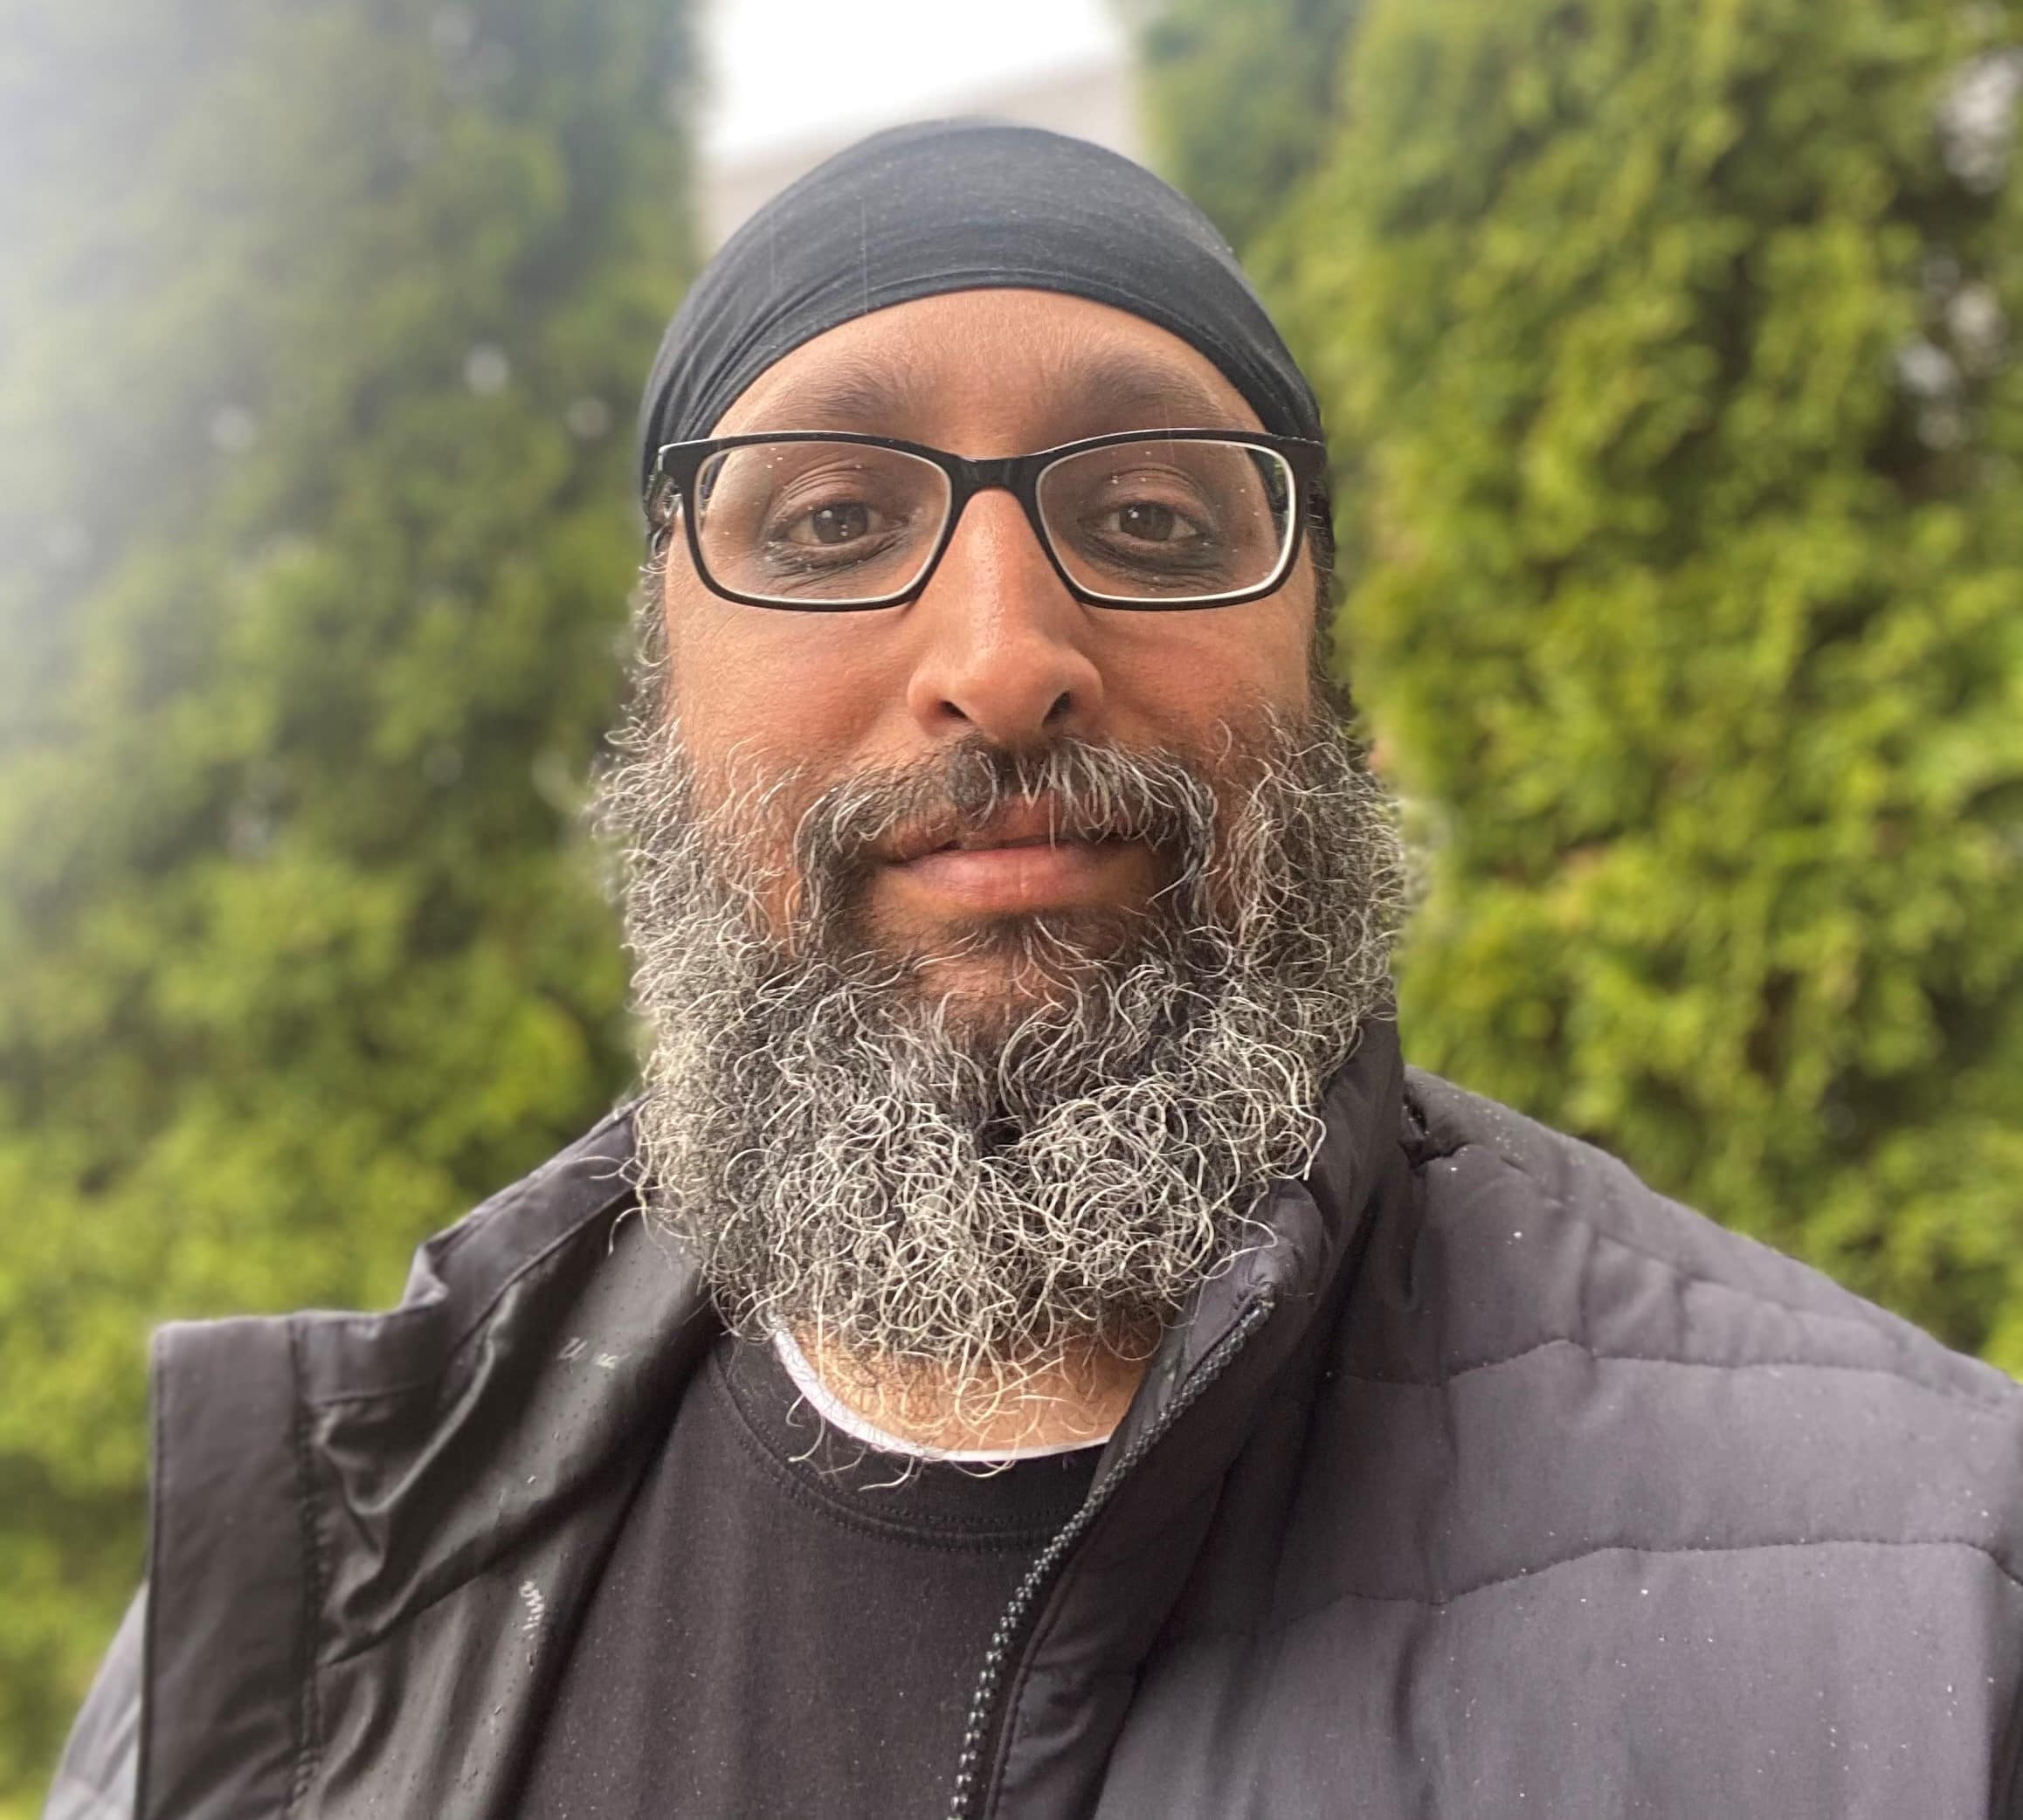 A man with a beard, head covering and glasses standing outside in front of a bush.